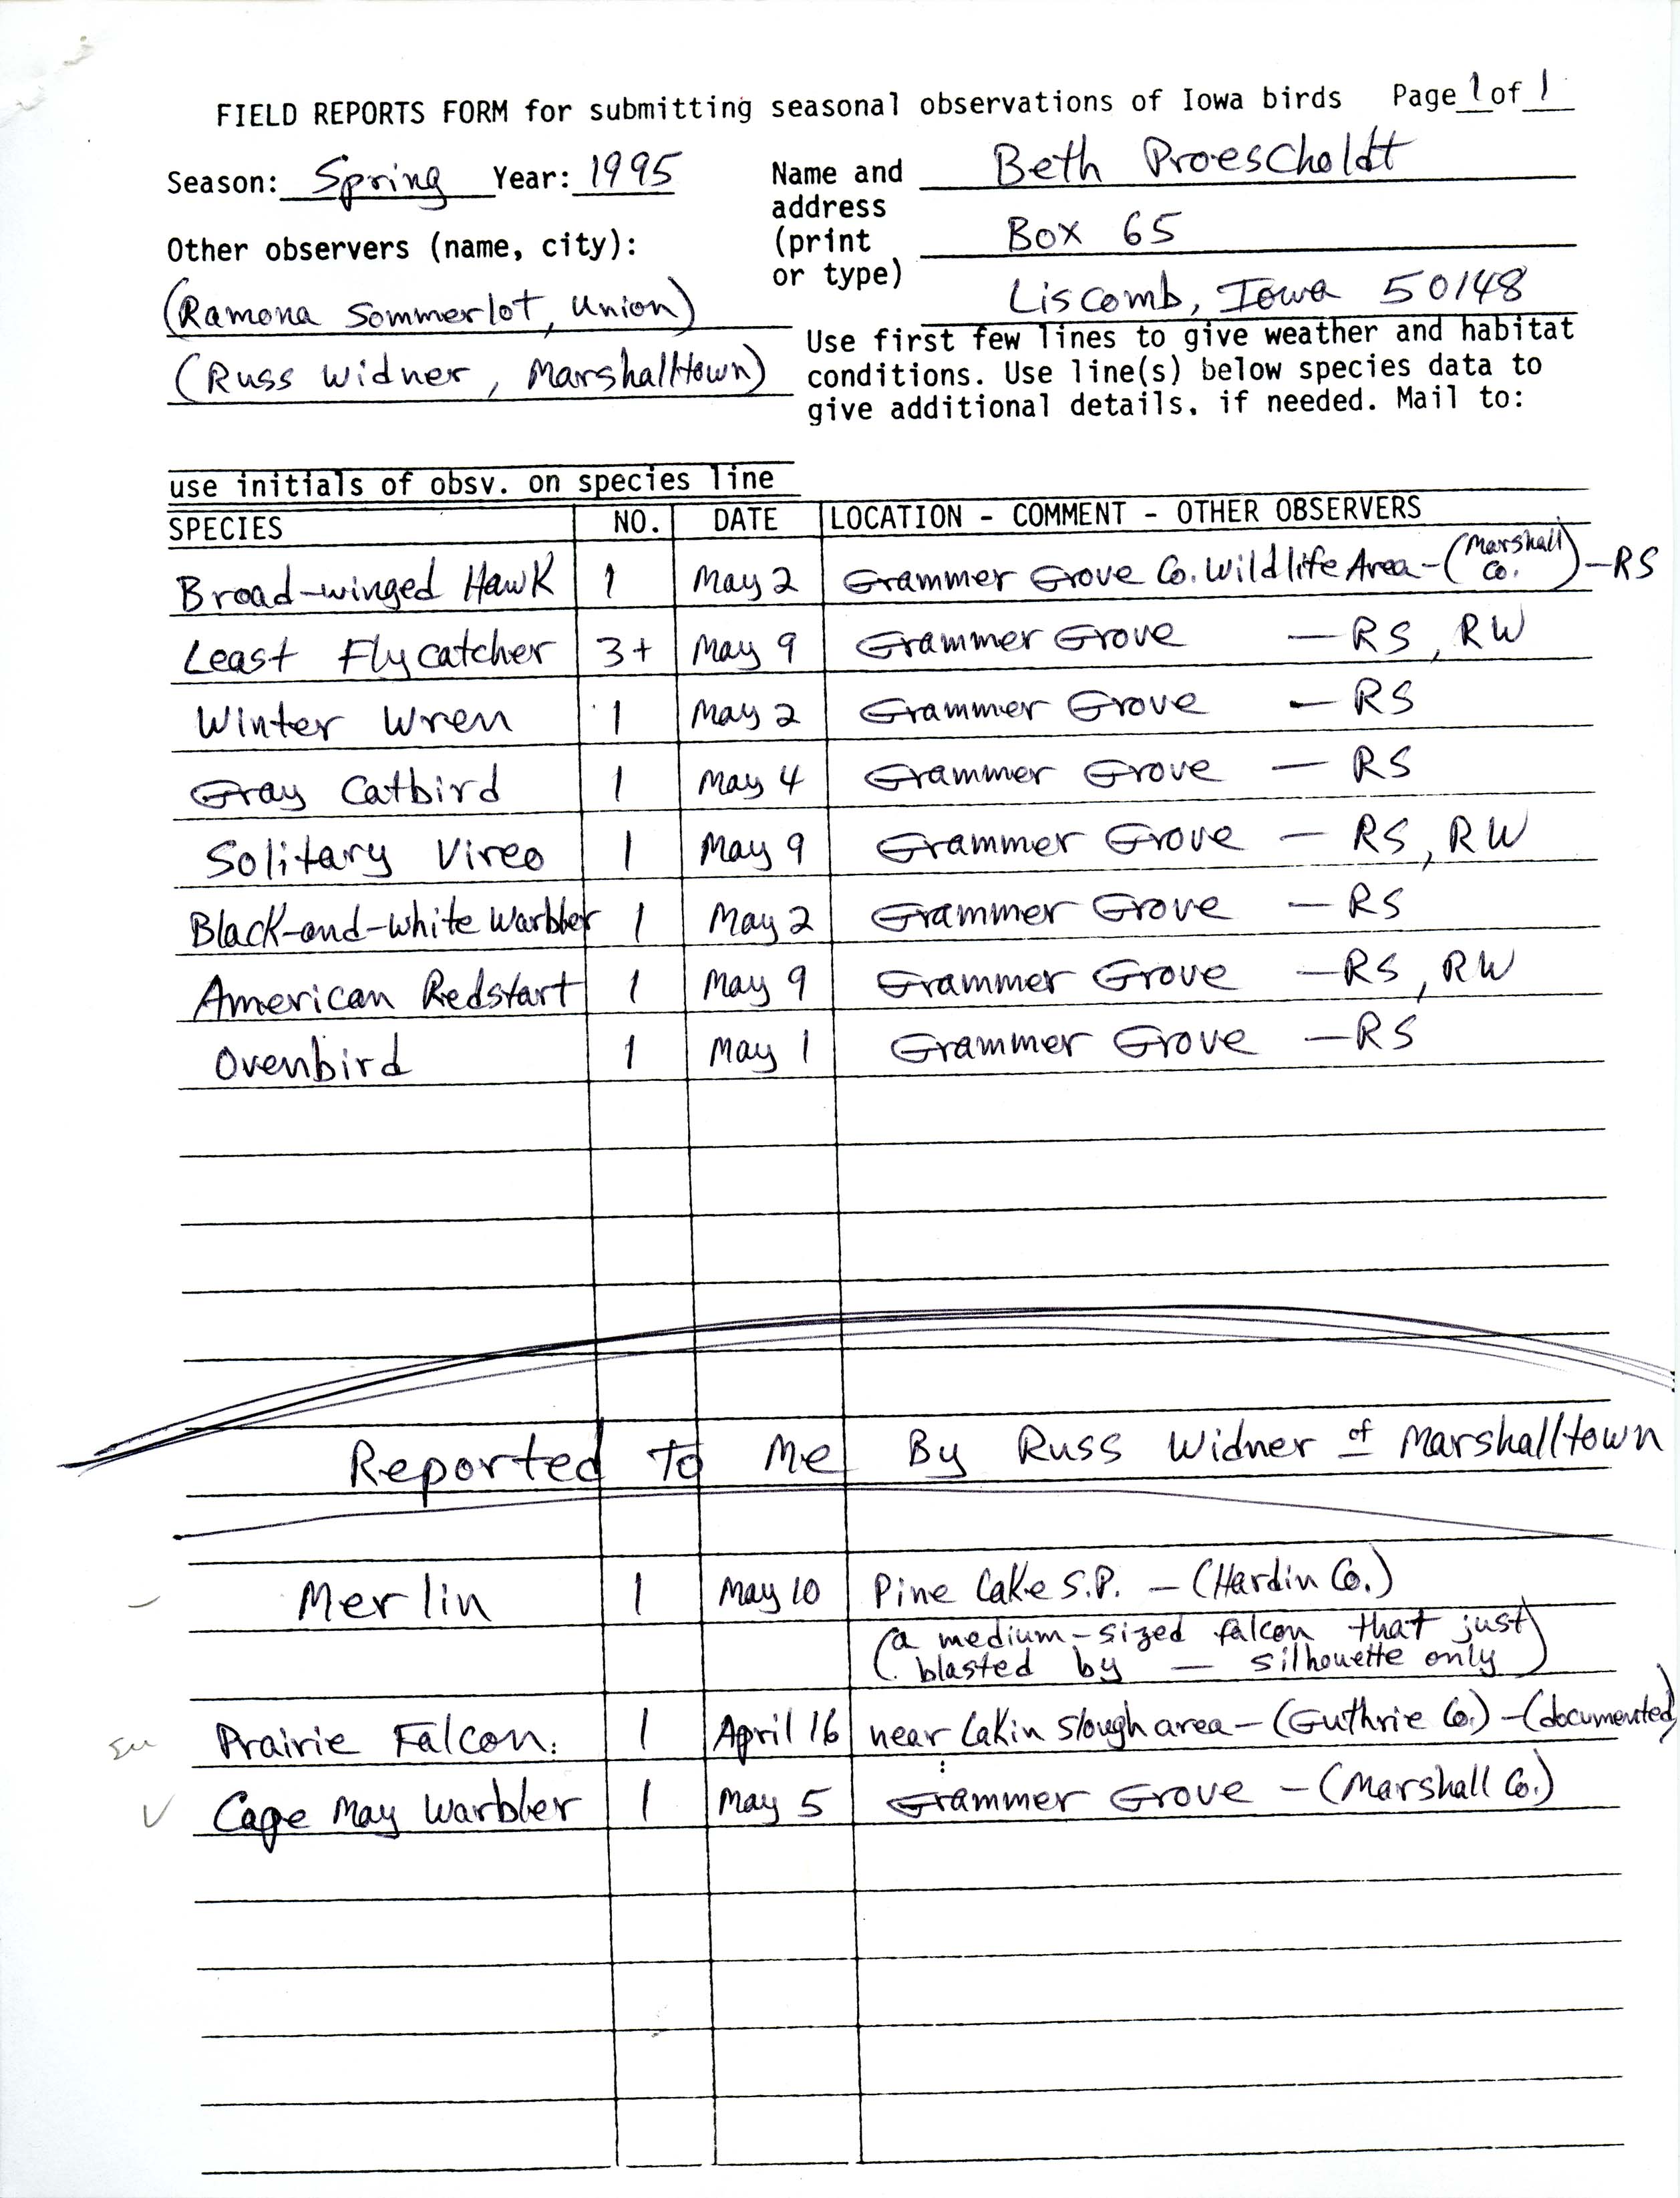 Field reports form for submitting seasonal observations of Iowa birds, spring 1995, Beth Proescholdt